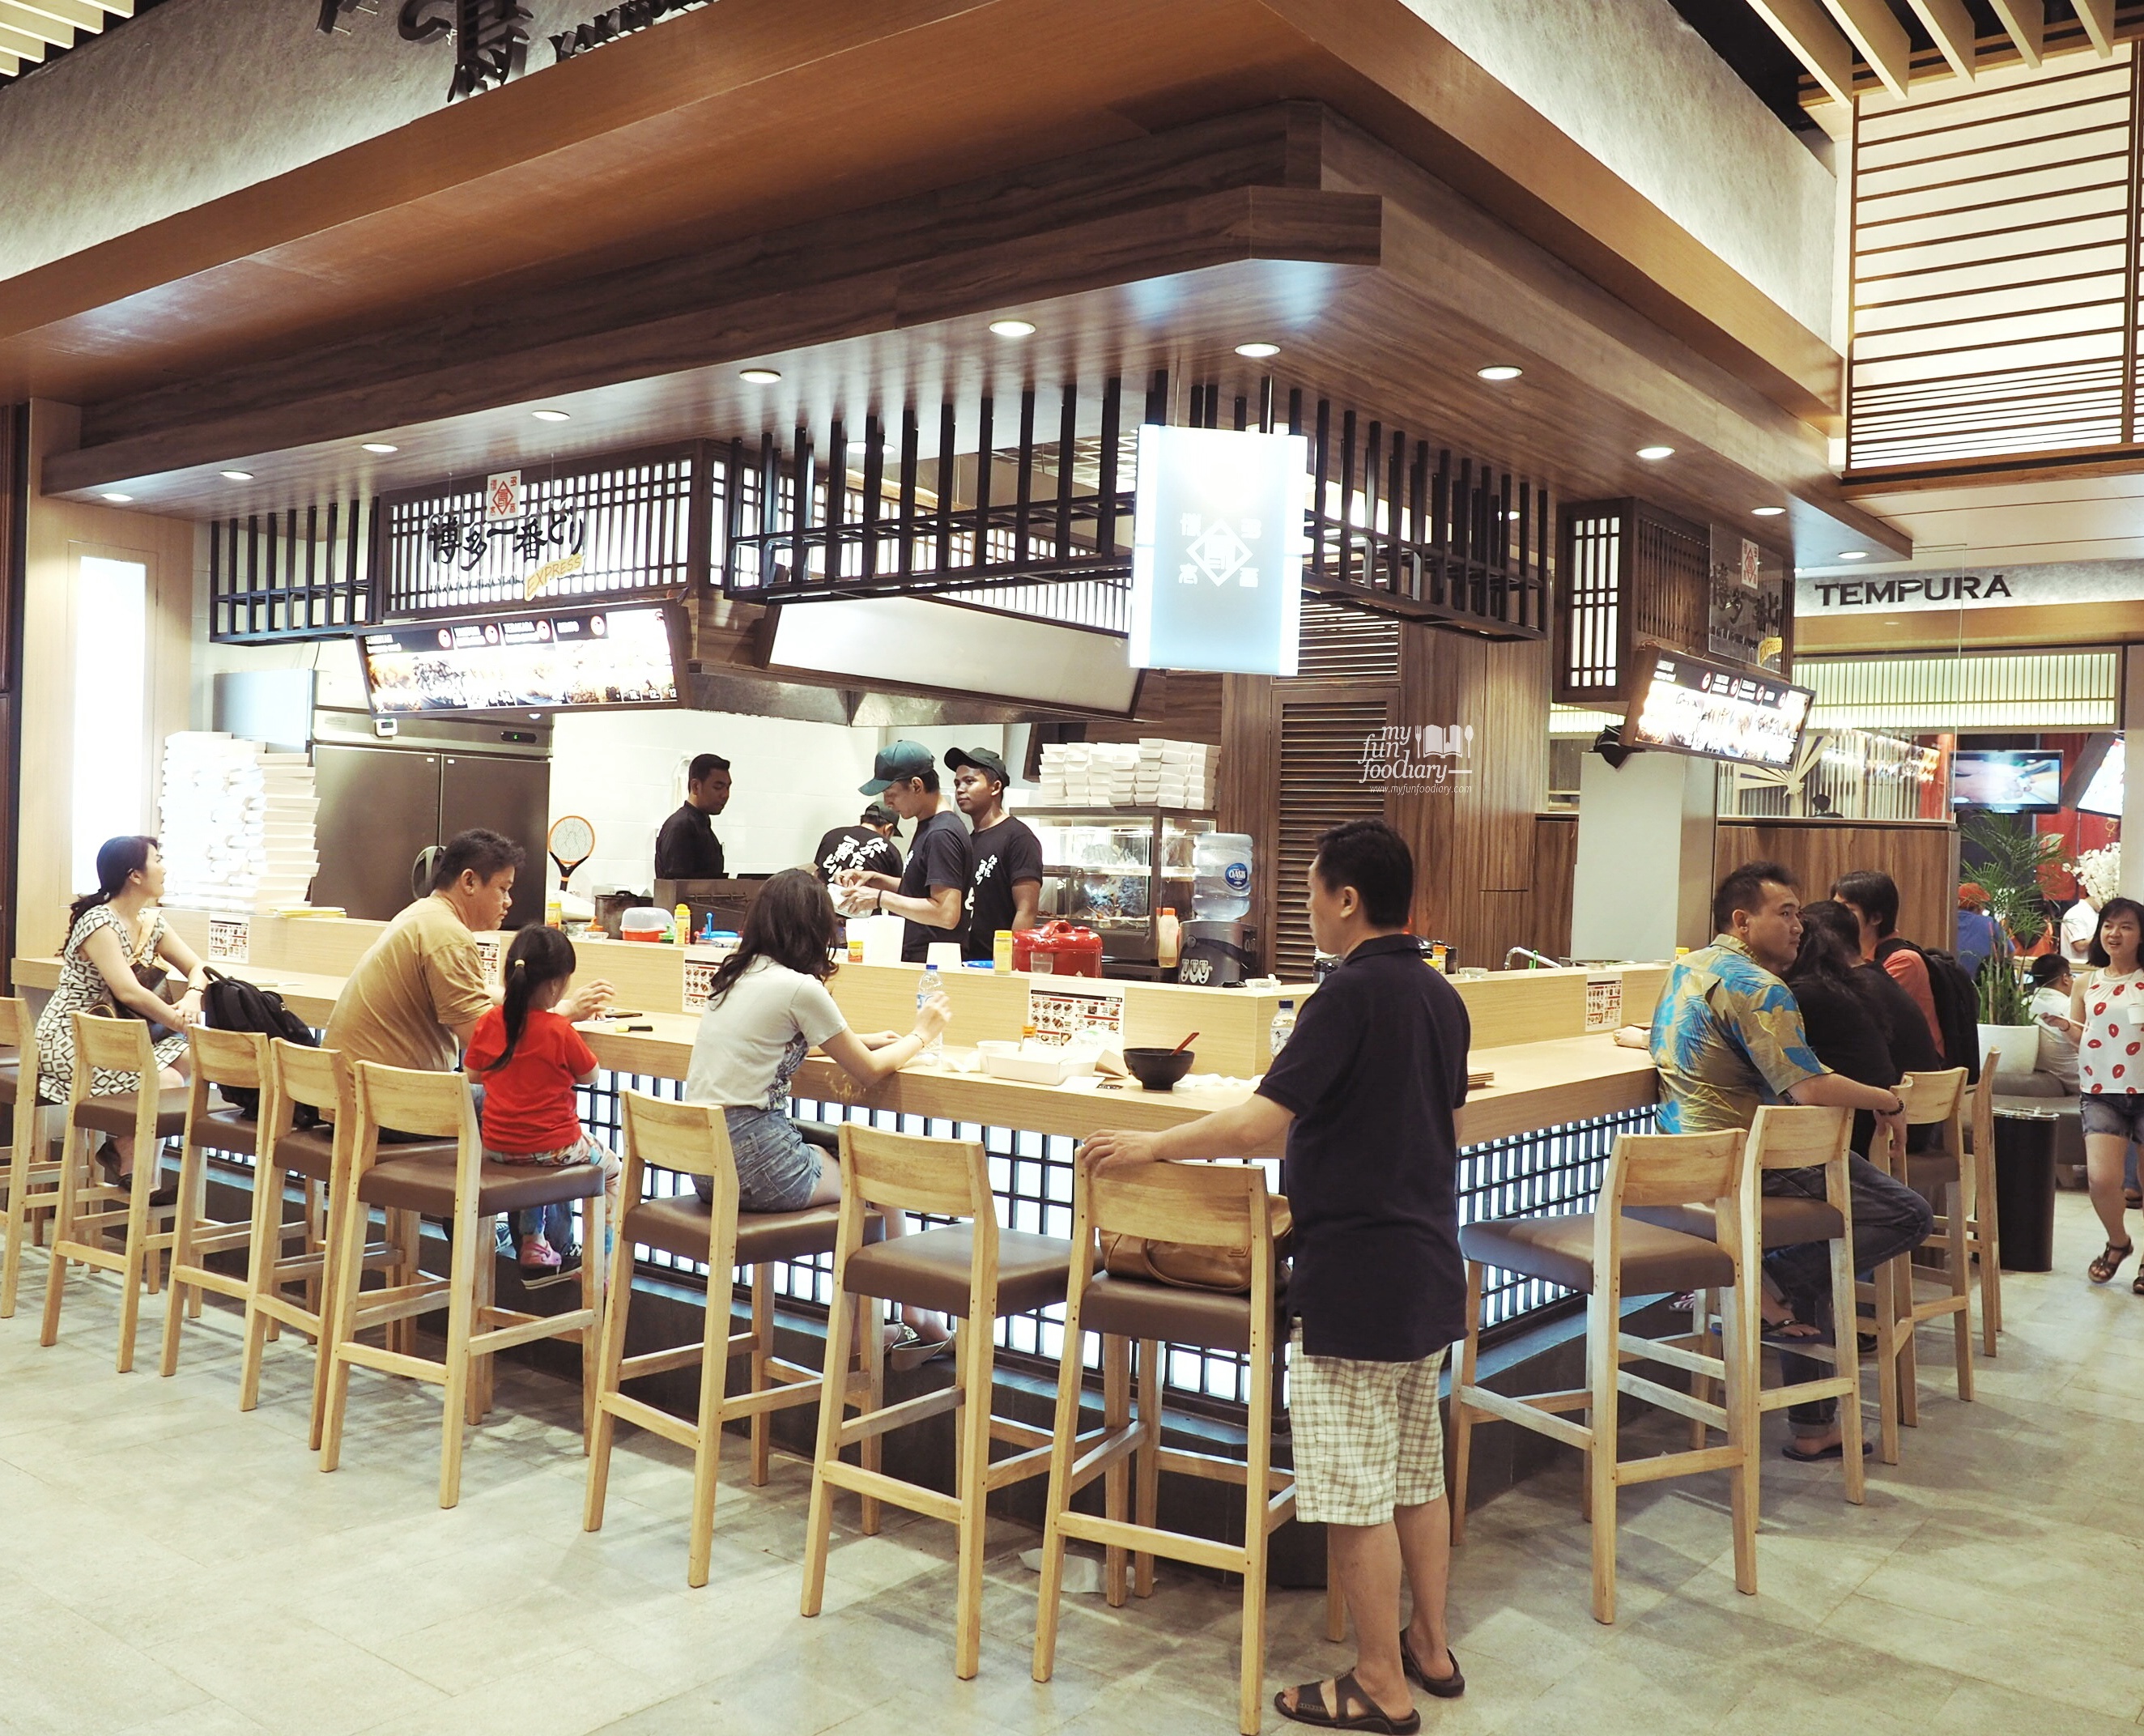  Yakitori Counter at The Food Culture AEON Mall by Myfunfoodiary